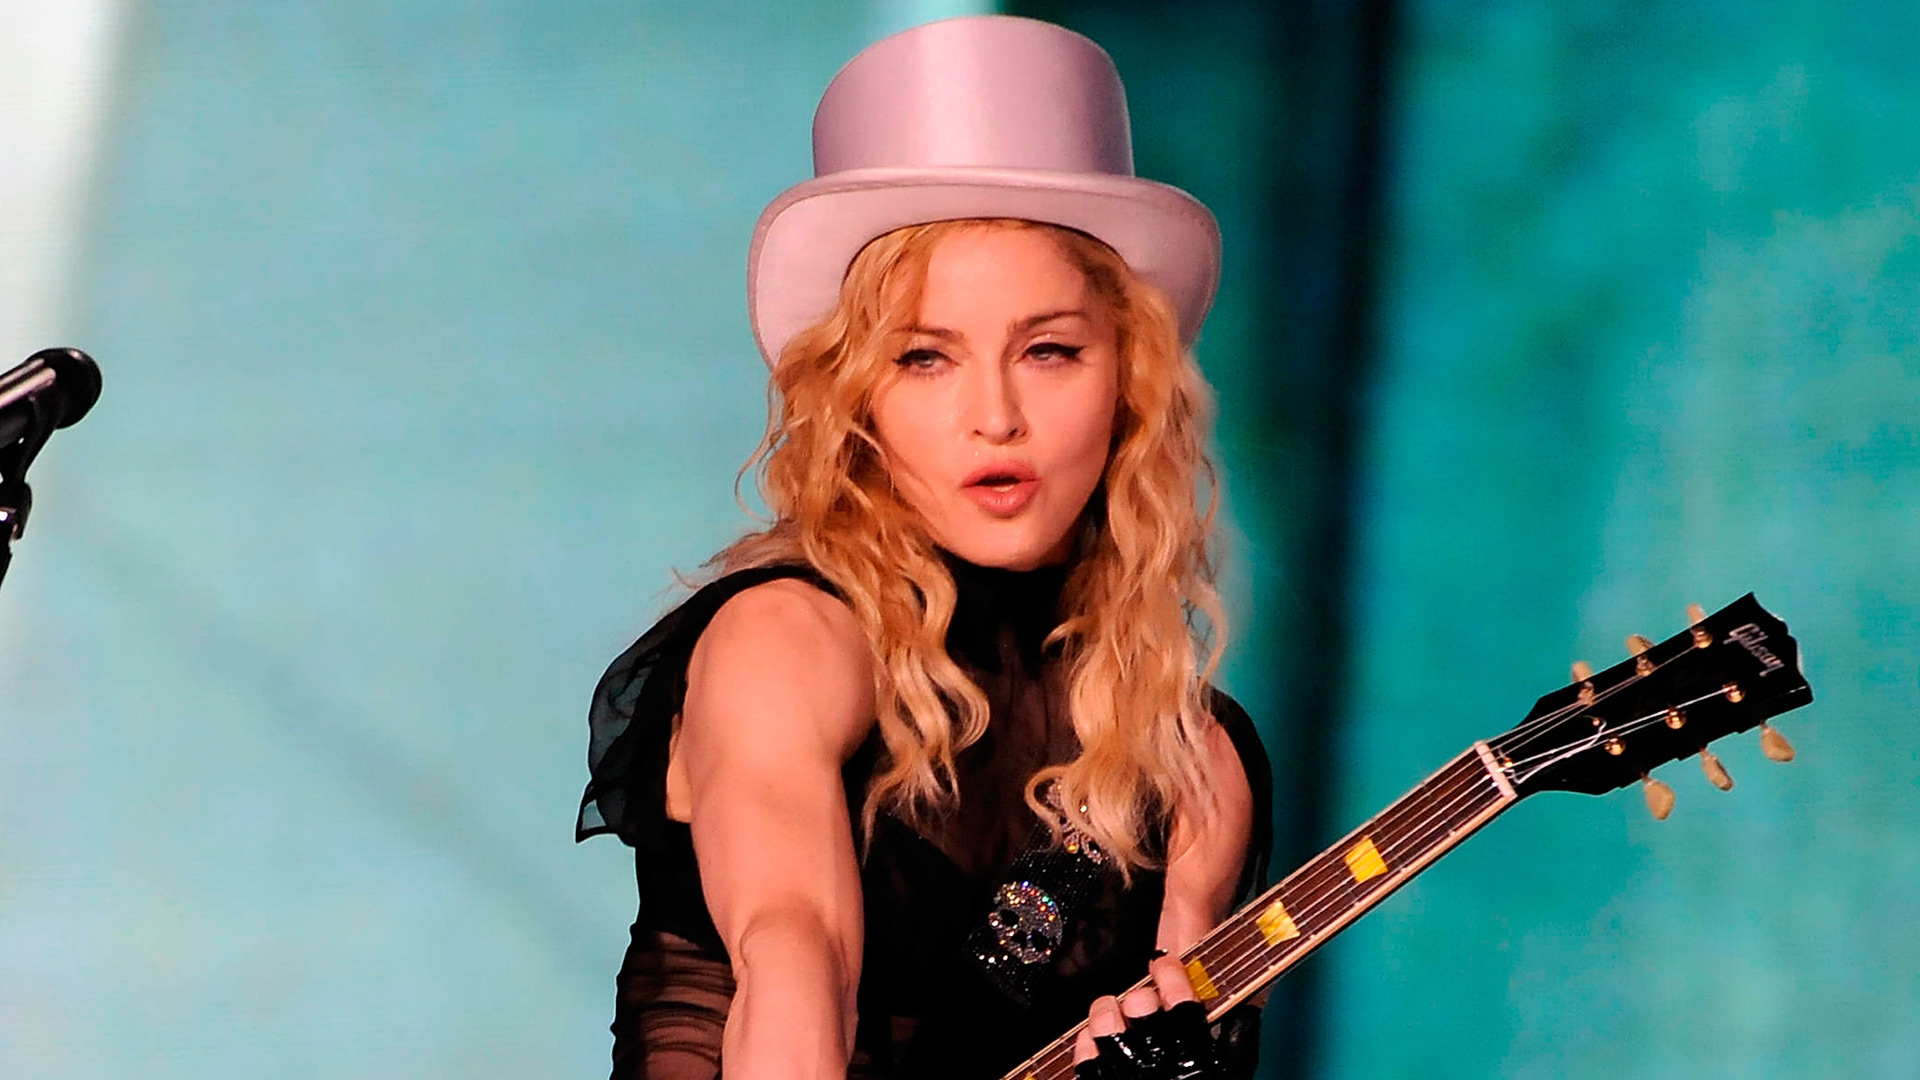 August madonna kicked off her record breaking sticky sweet tour